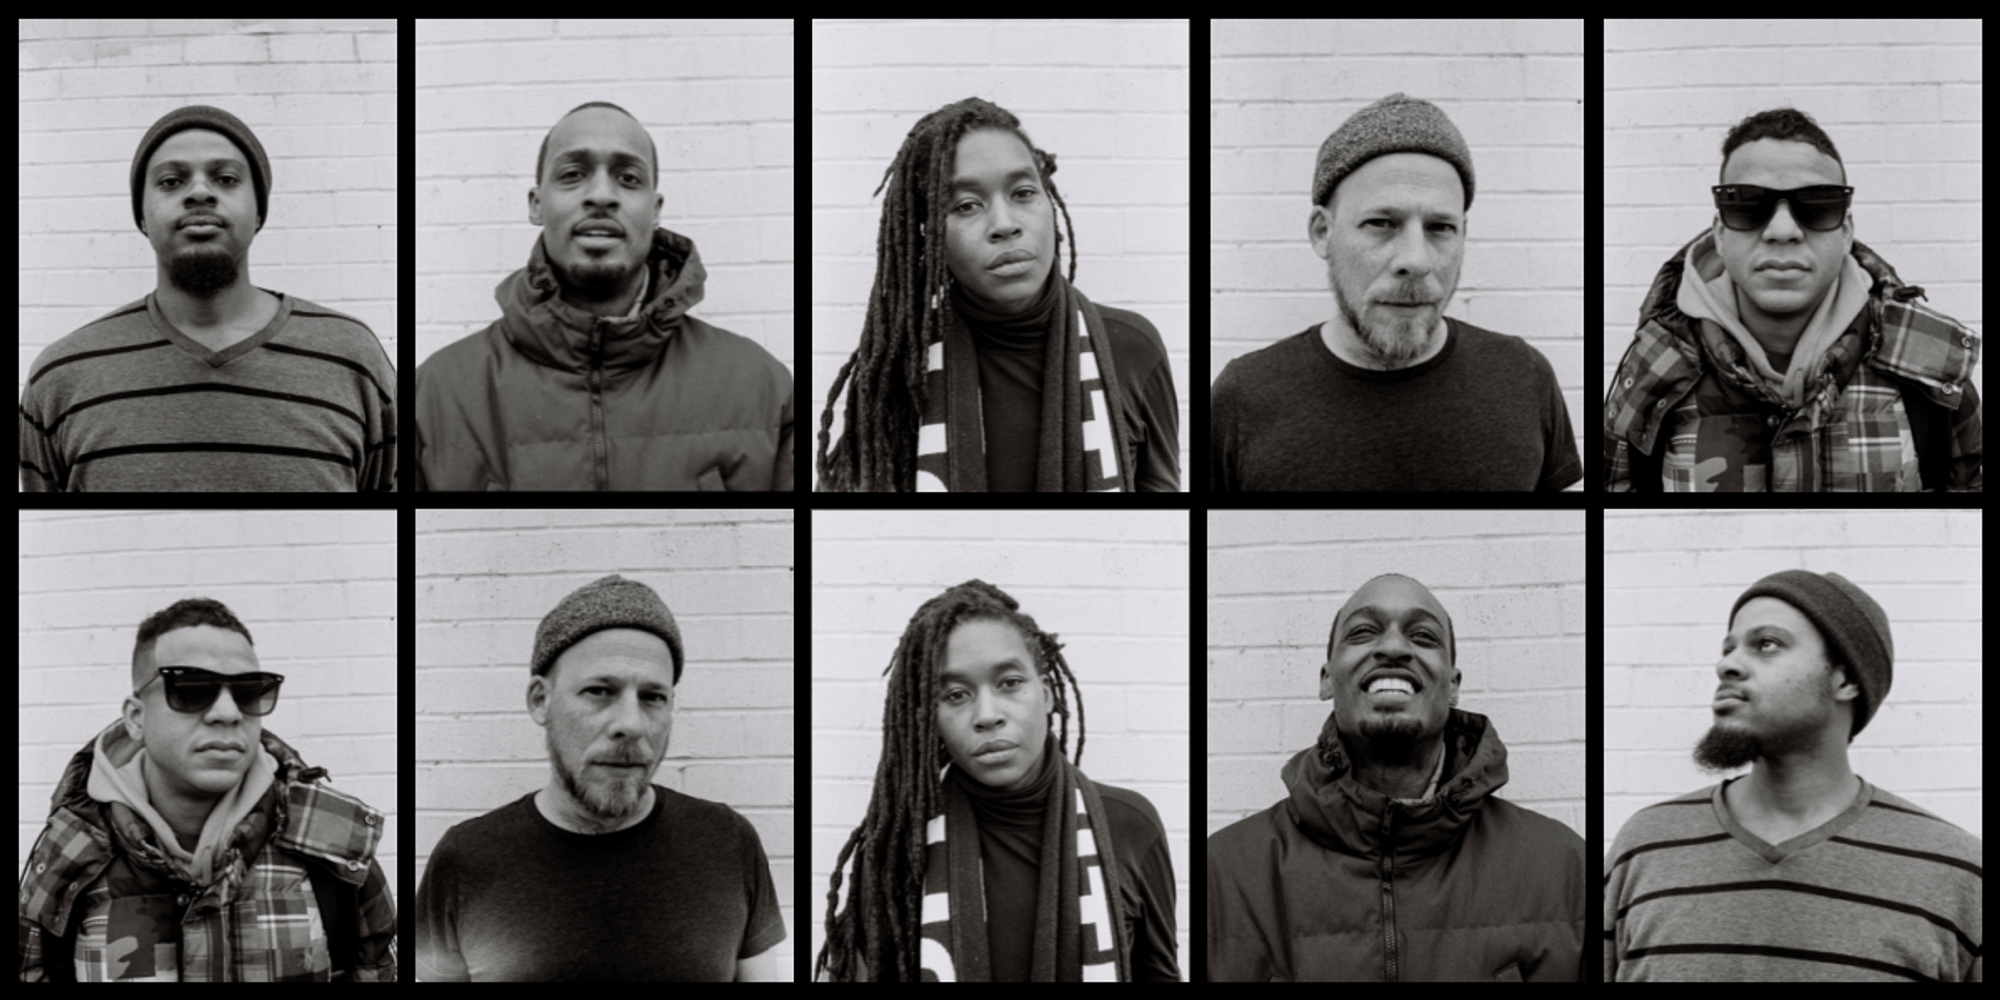 Photos of the collective Irreversible Entanglements, who have released two albums with International Anthem, includes former Pioneer Works music resident Luke Stewart.